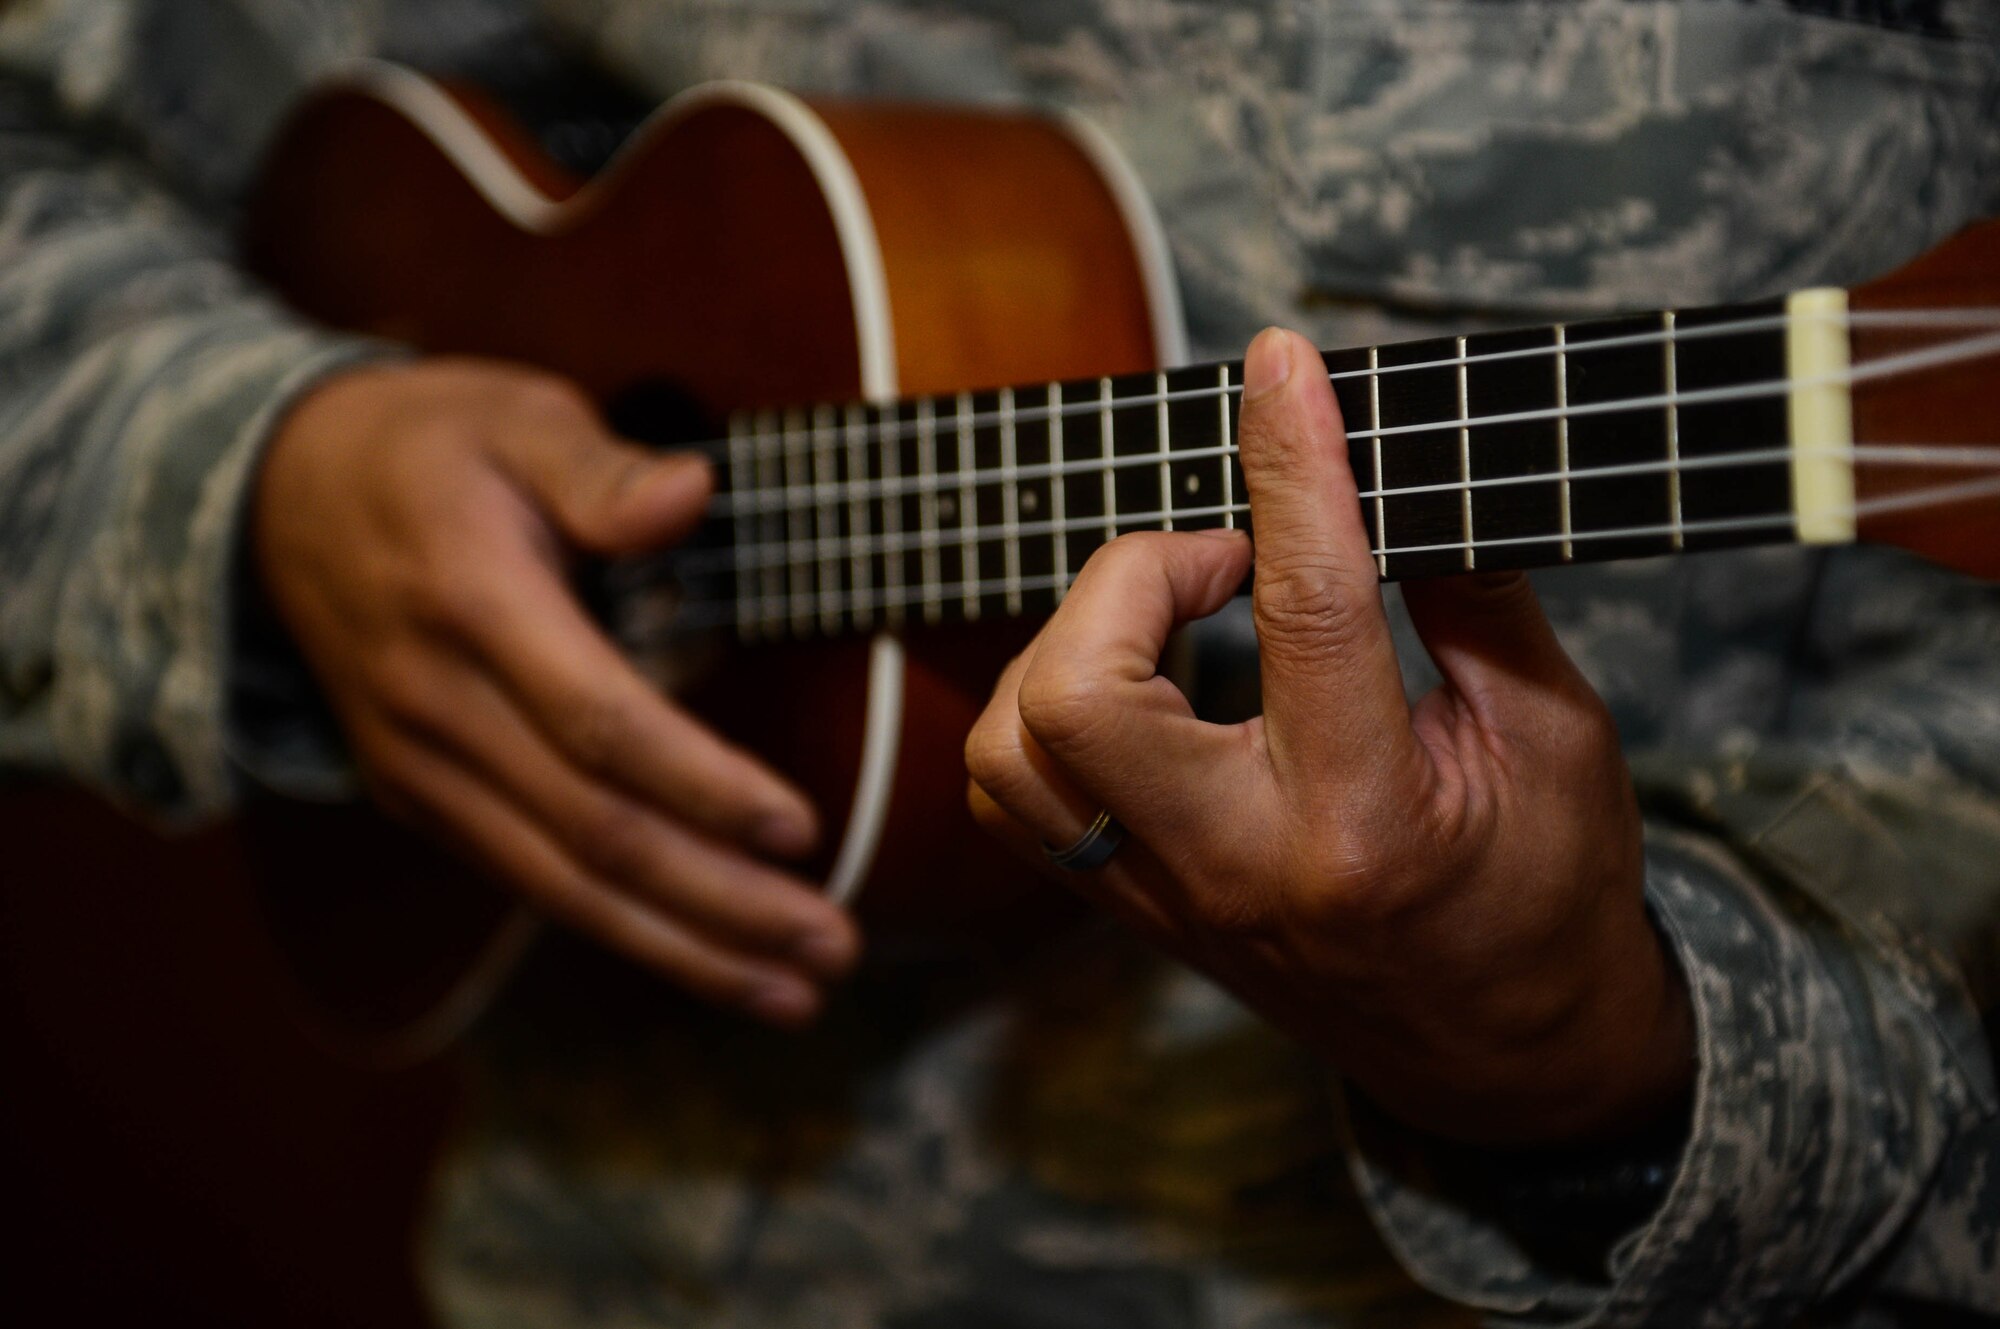 U.S. Air Force Tech. Sgt. Mark Romera, a 52nd Medical Support Squadron ultrasound technician from Daily City, Calif., plays a ukulele at a Filipino culture booth during a Diversity Day celebration at Spangdahlem Air Base, Germany, Aug. 21, 2014. Diversity Day aims to raise awareness and eliminate stereotypes to bolster mission effectiveness in the workplace. (U.S. Air Force photo by Airman 1st Class Kyle Gese/Released)